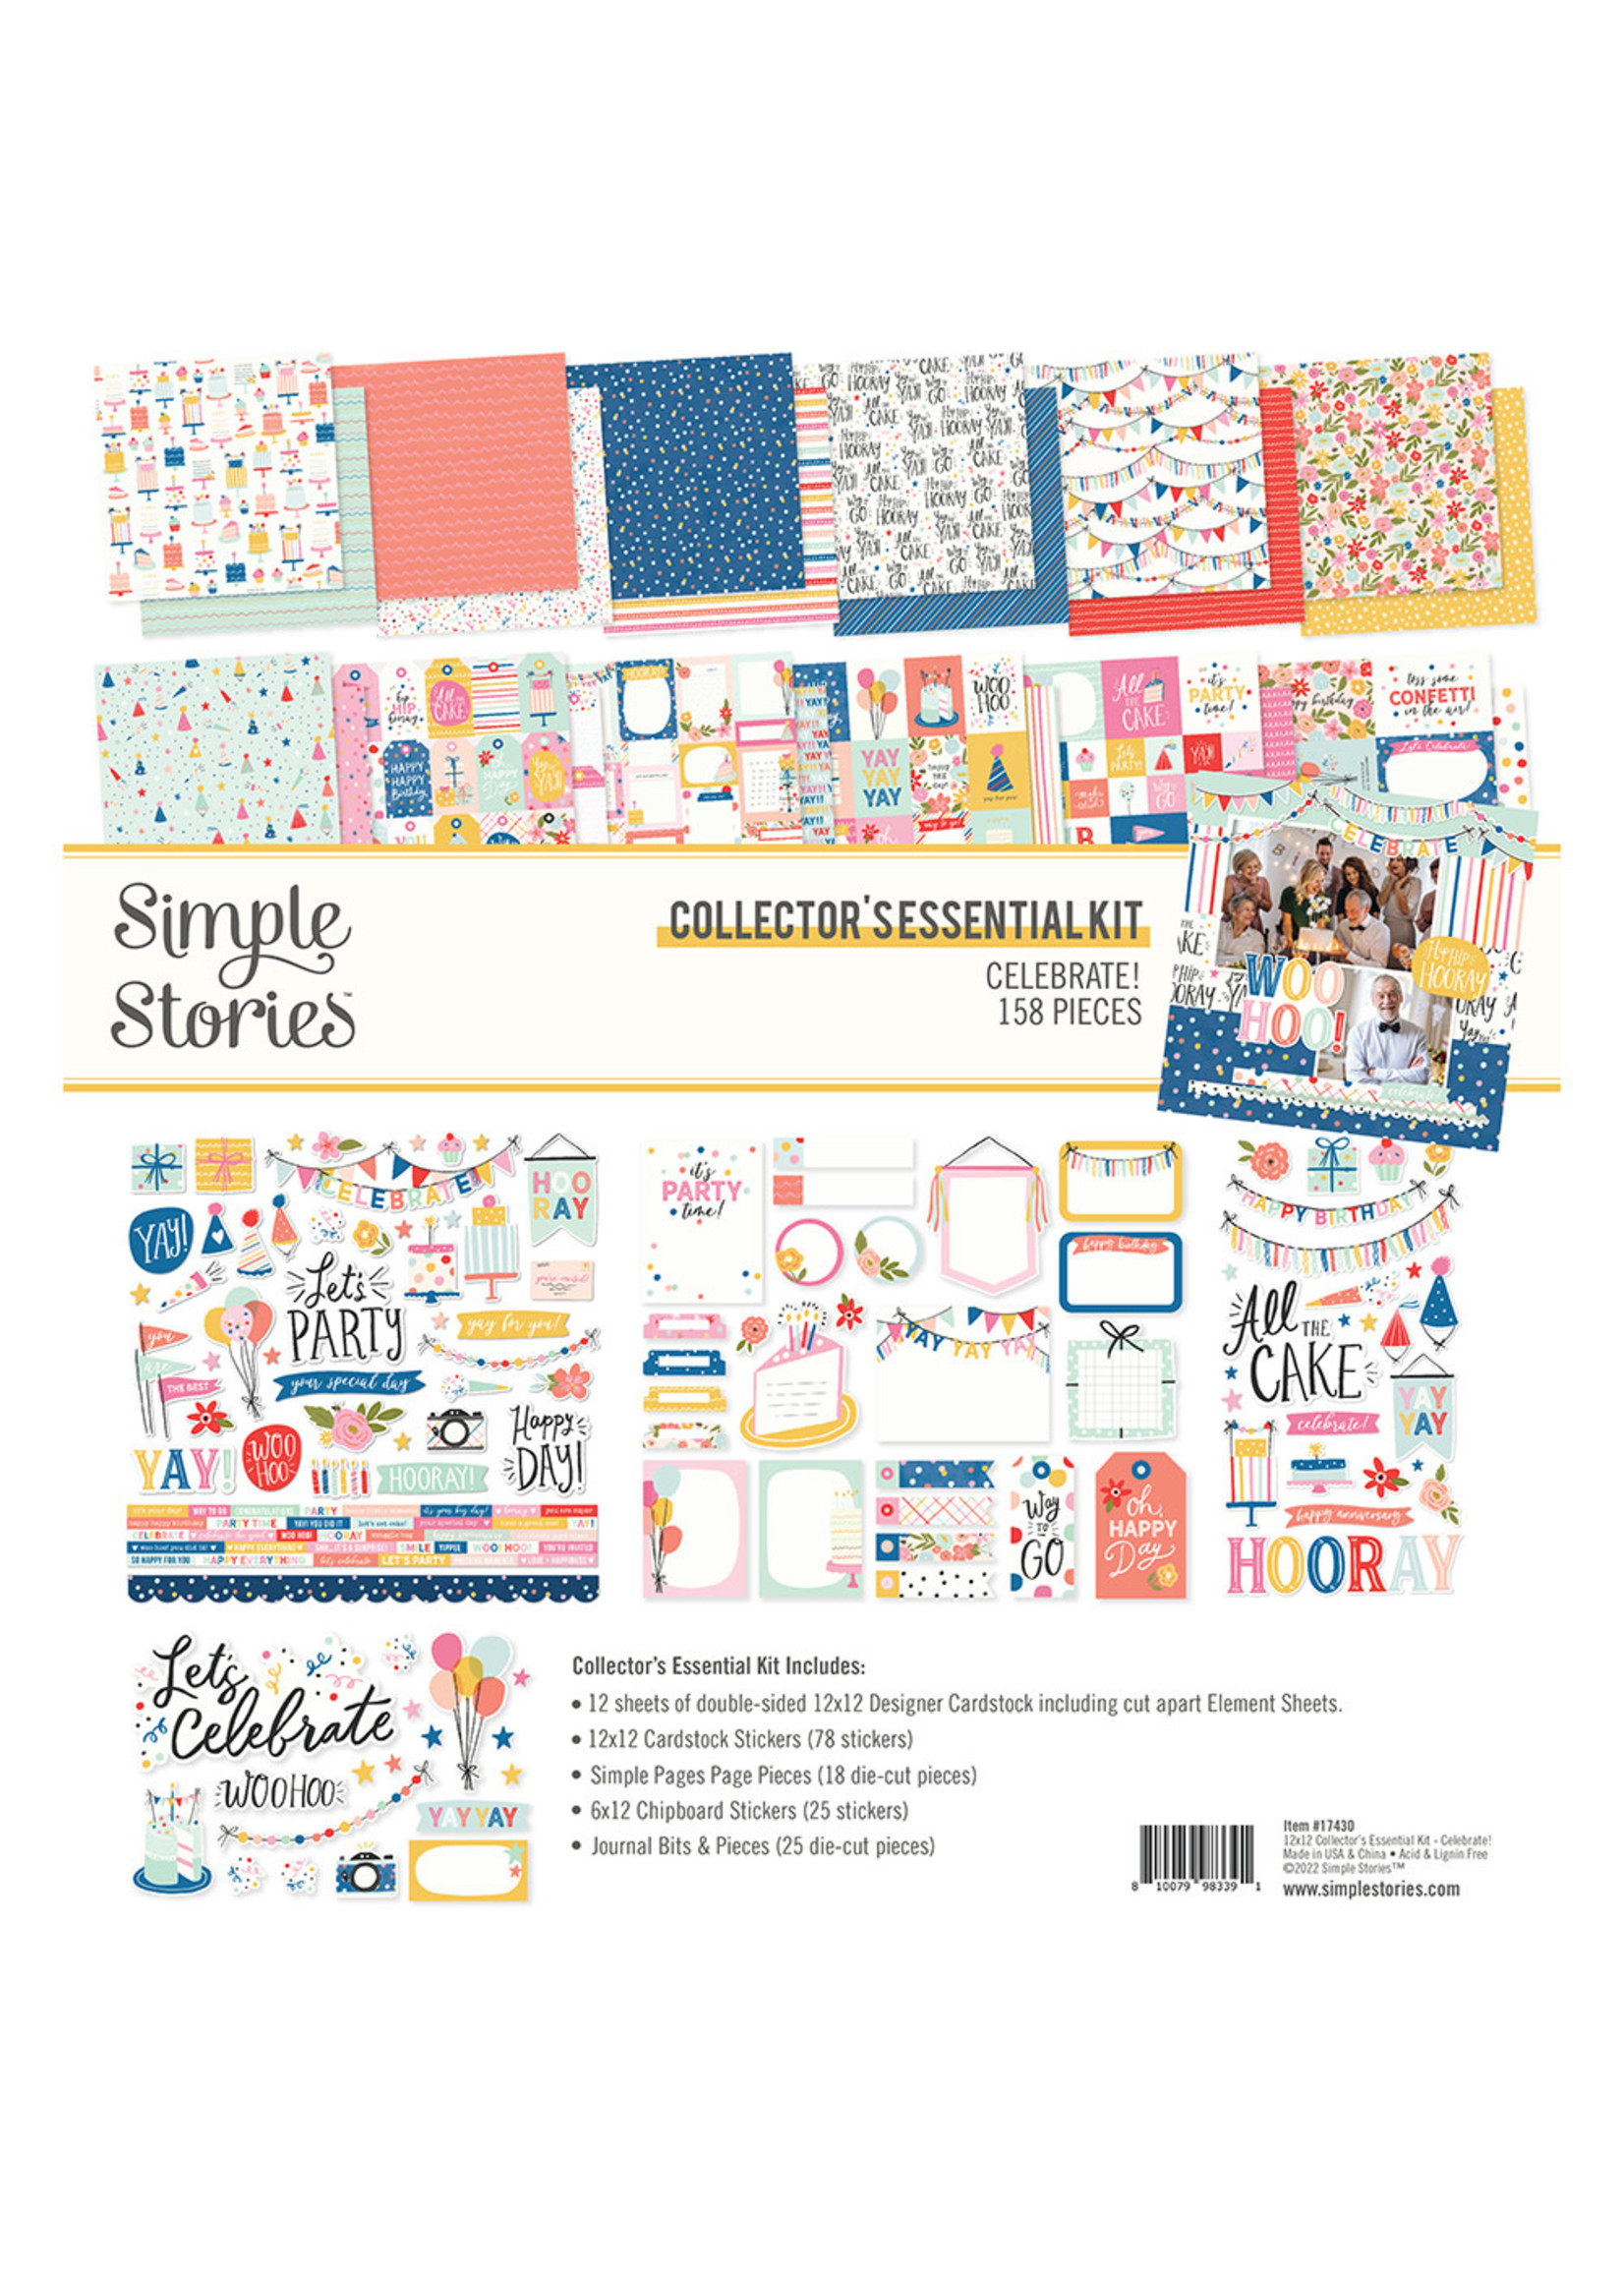 Simple Stories Celebrate! - Collector's Essential Kit